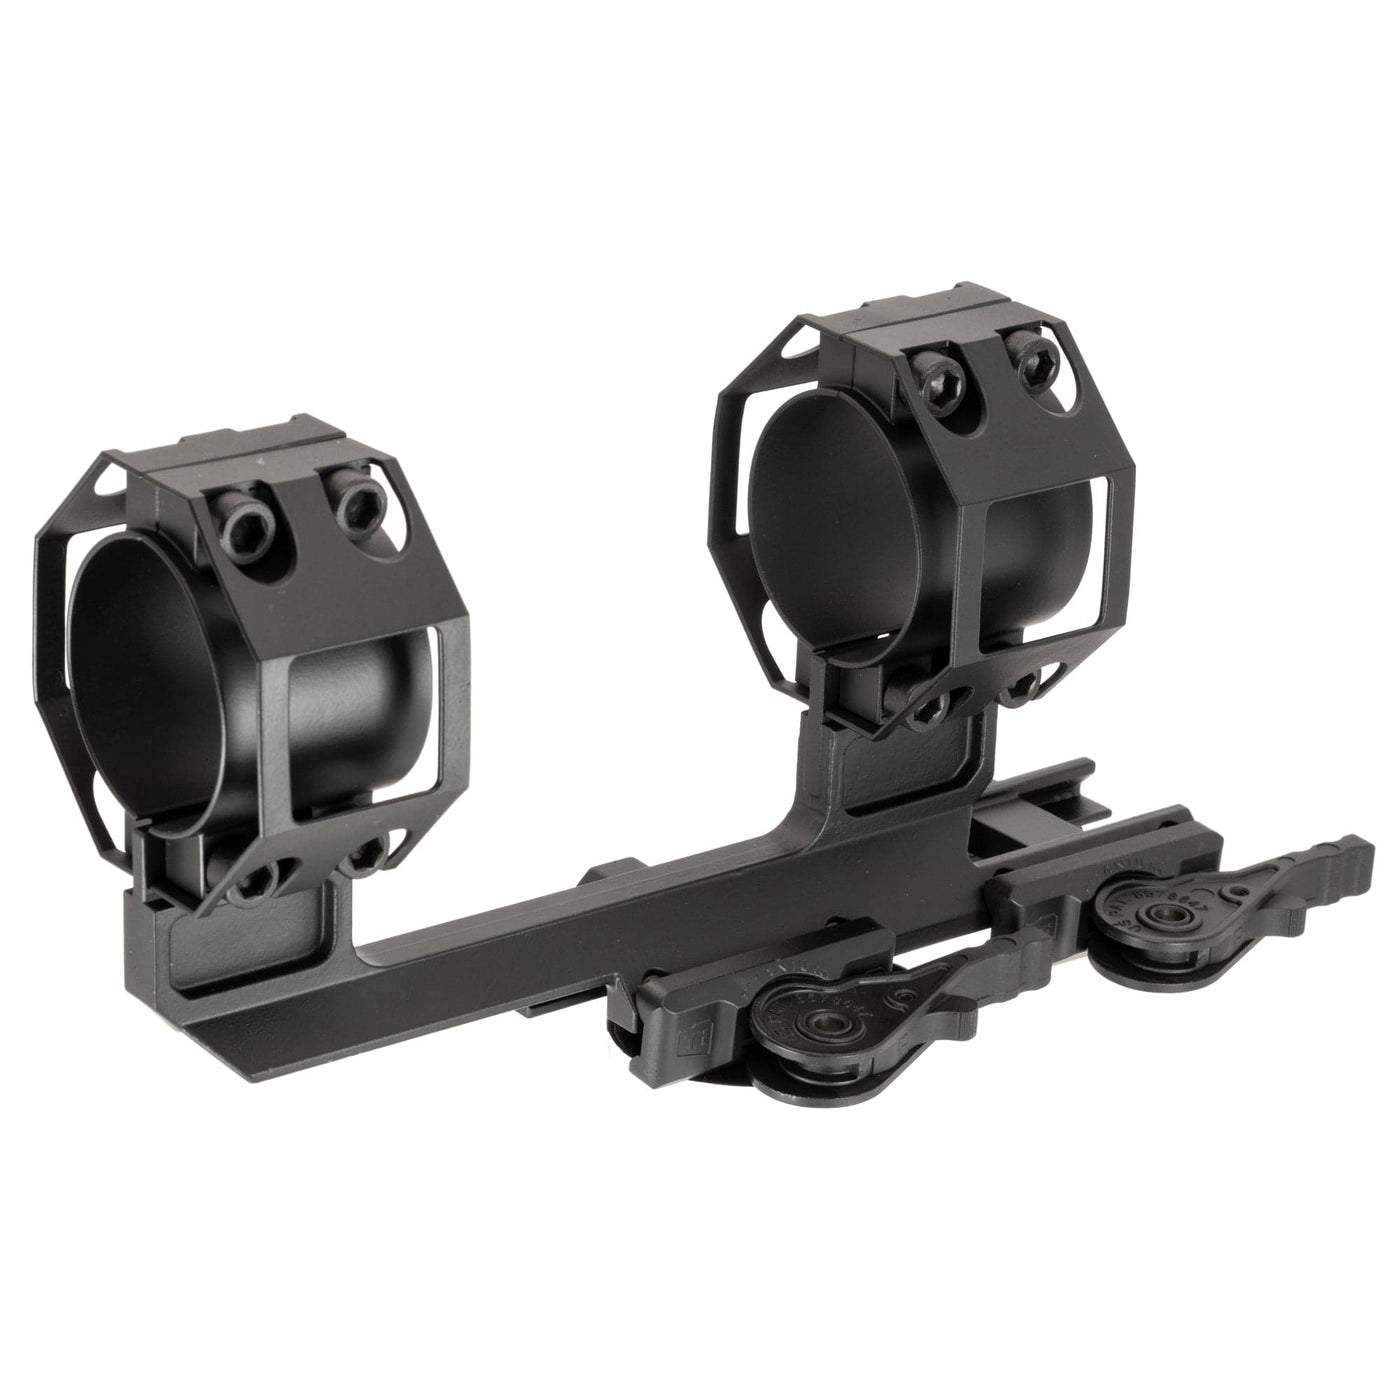 Texas Fowlers Am Def Recon One-pc Mnt Ti 30mm Scope Mounts